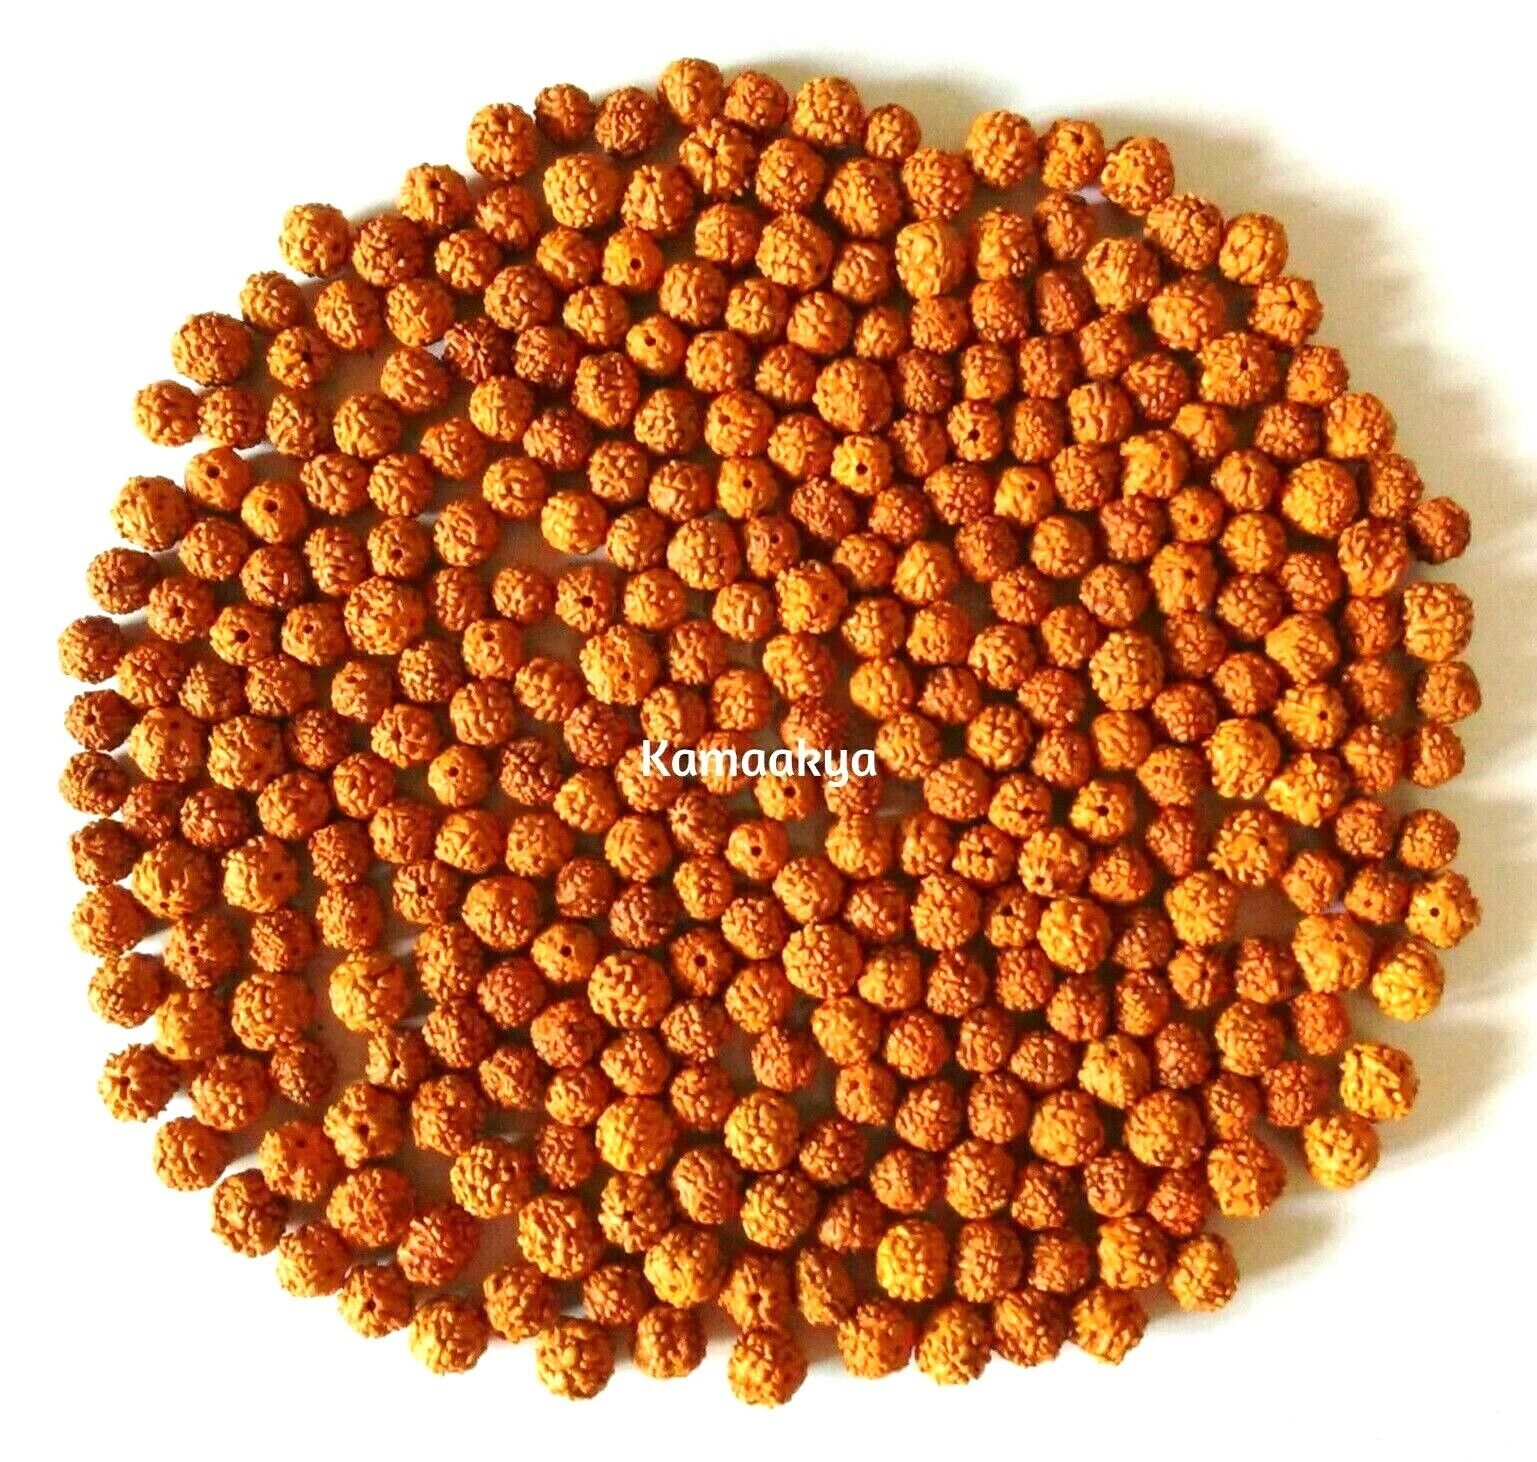 Wholesale Lot 11000 Pieces 7 mm Rudraksha Loose Beads for Jewelry Making craft